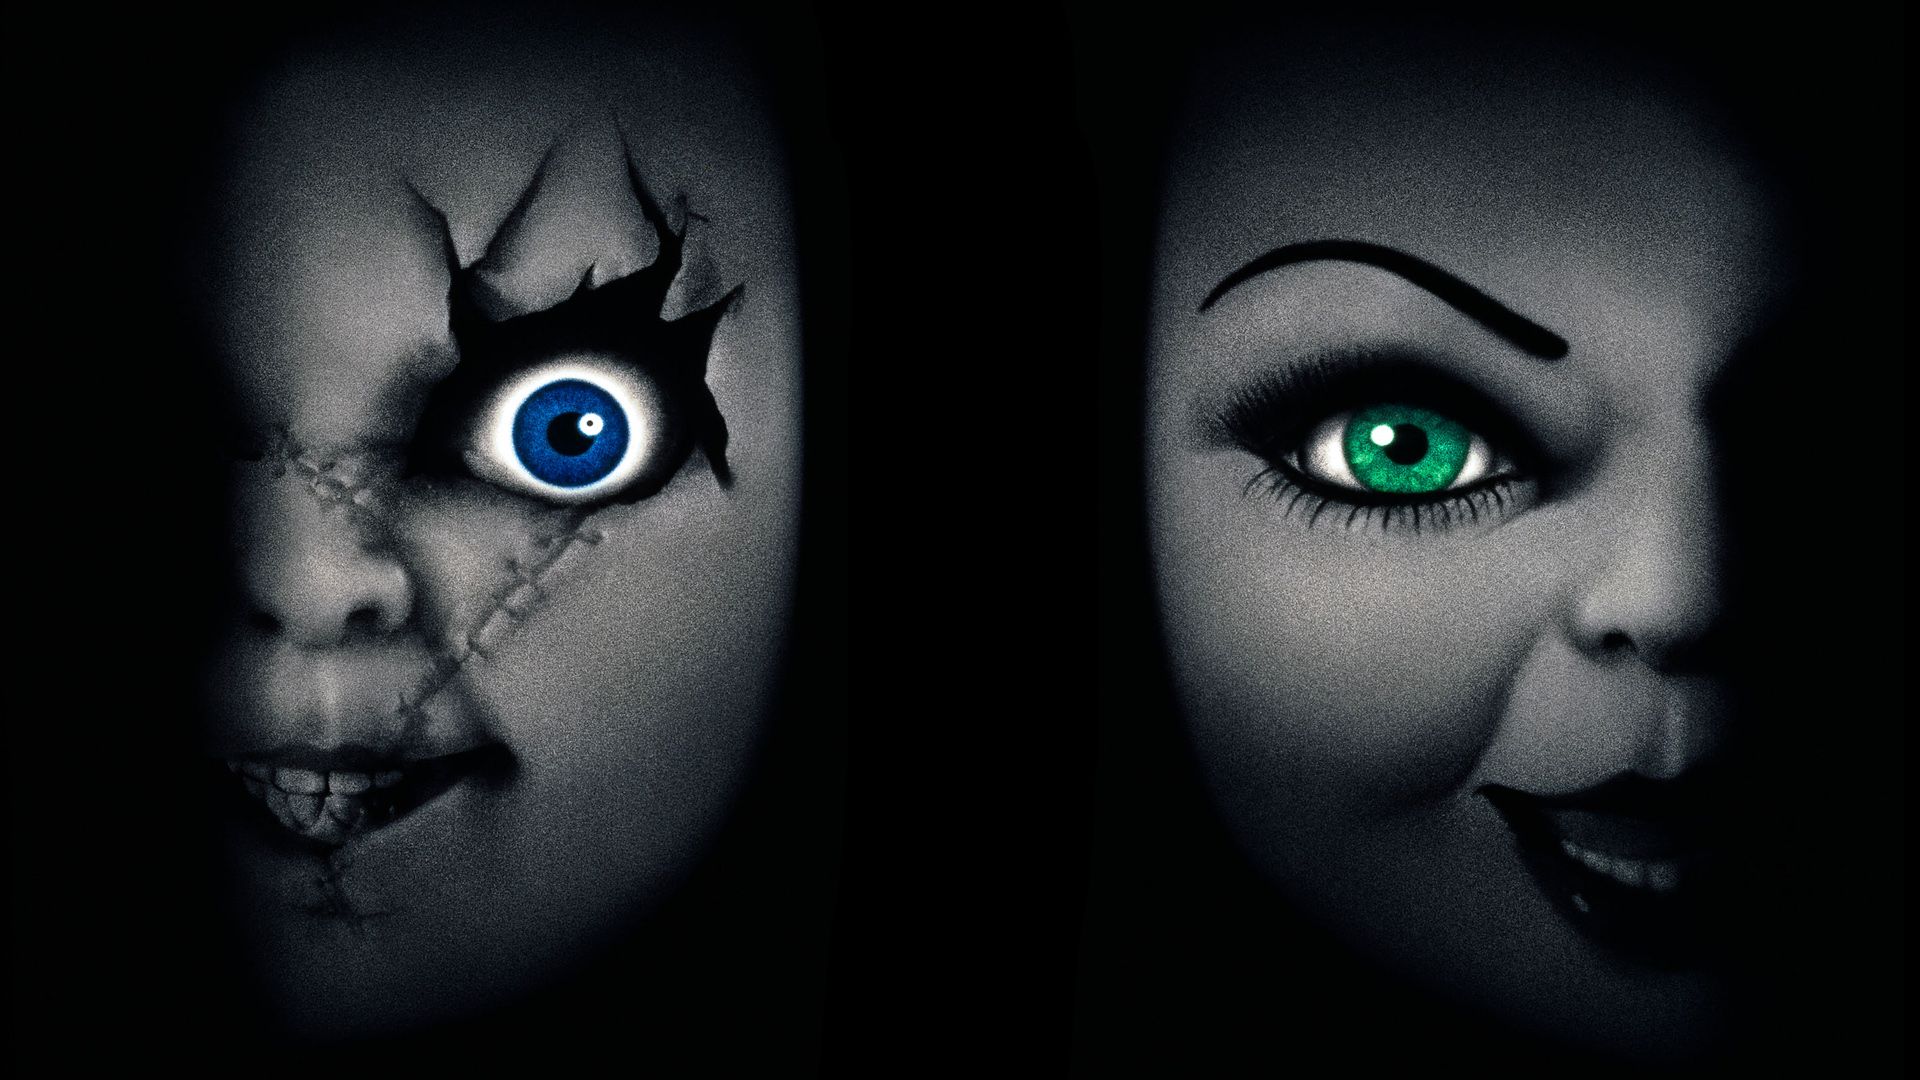 Bride of Chucky background